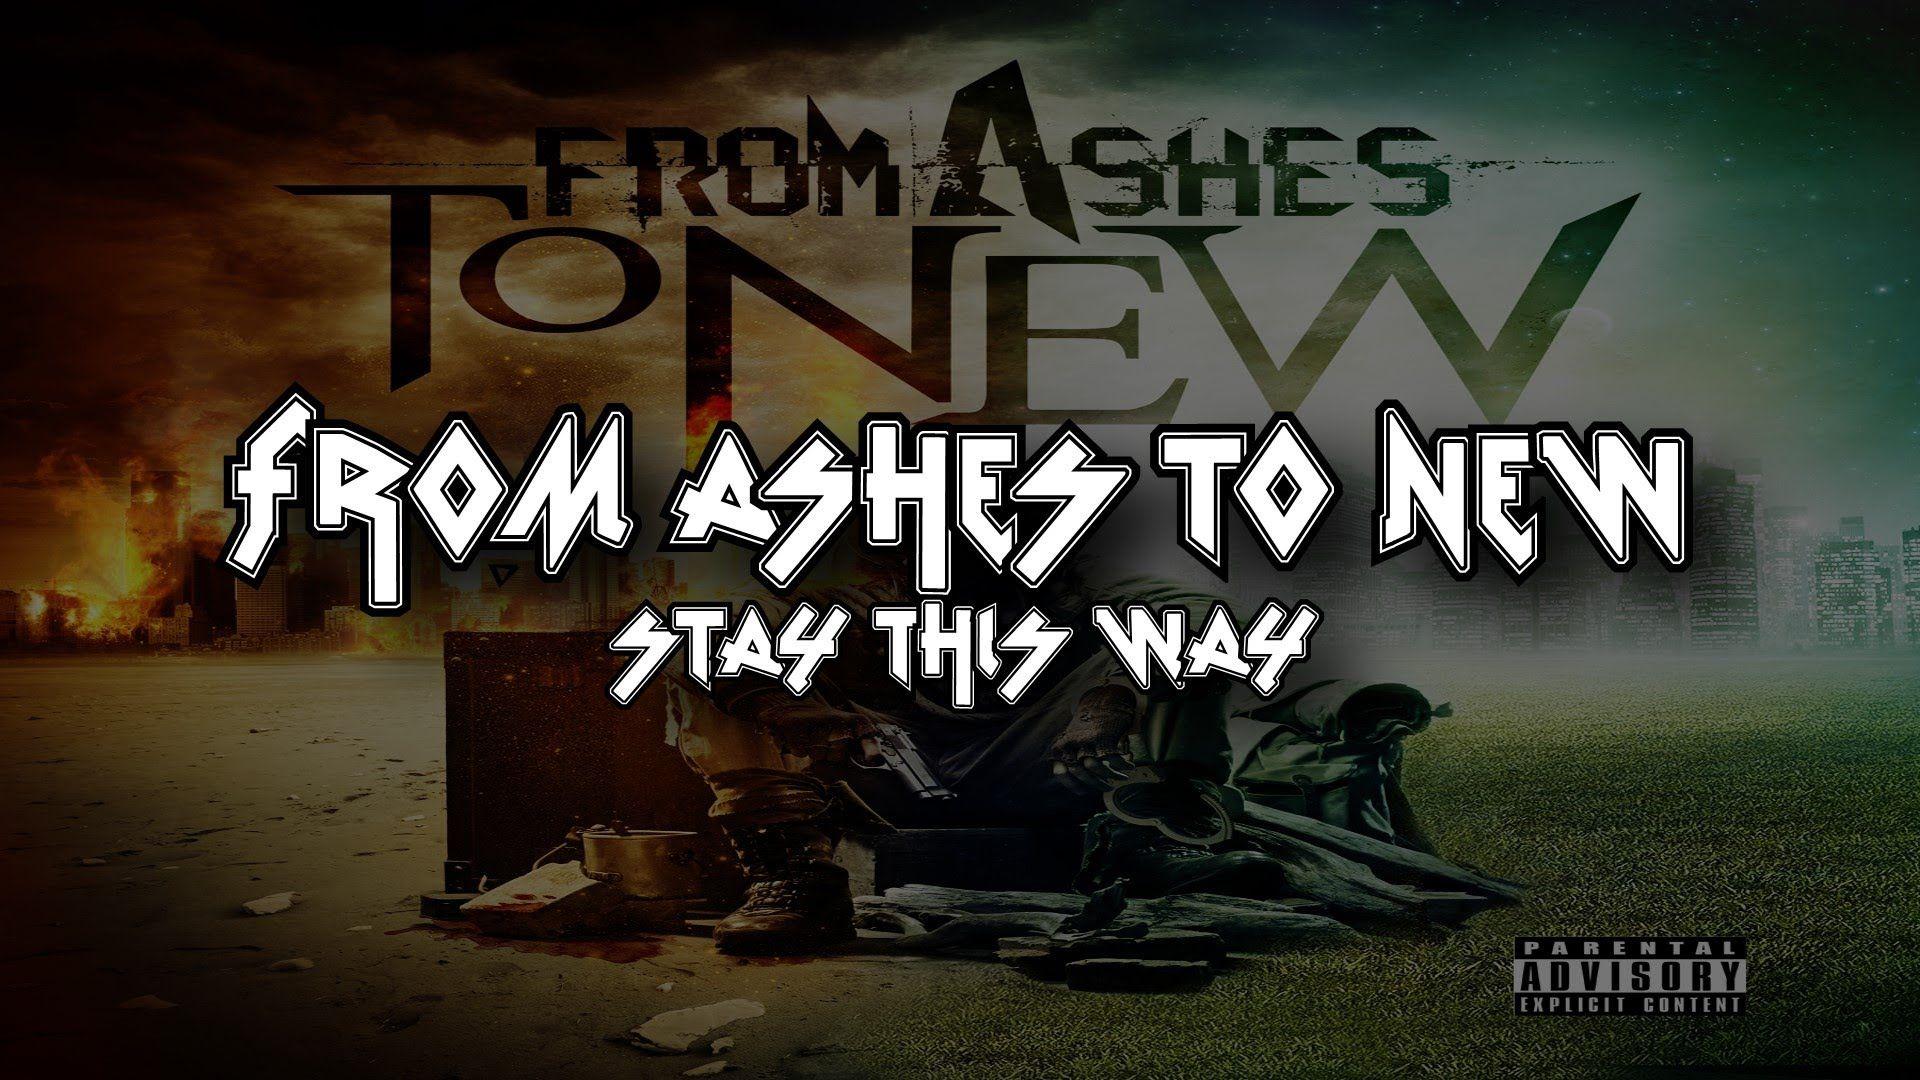 From Ashes To New This Way [Lyrics Video] [Full HD]